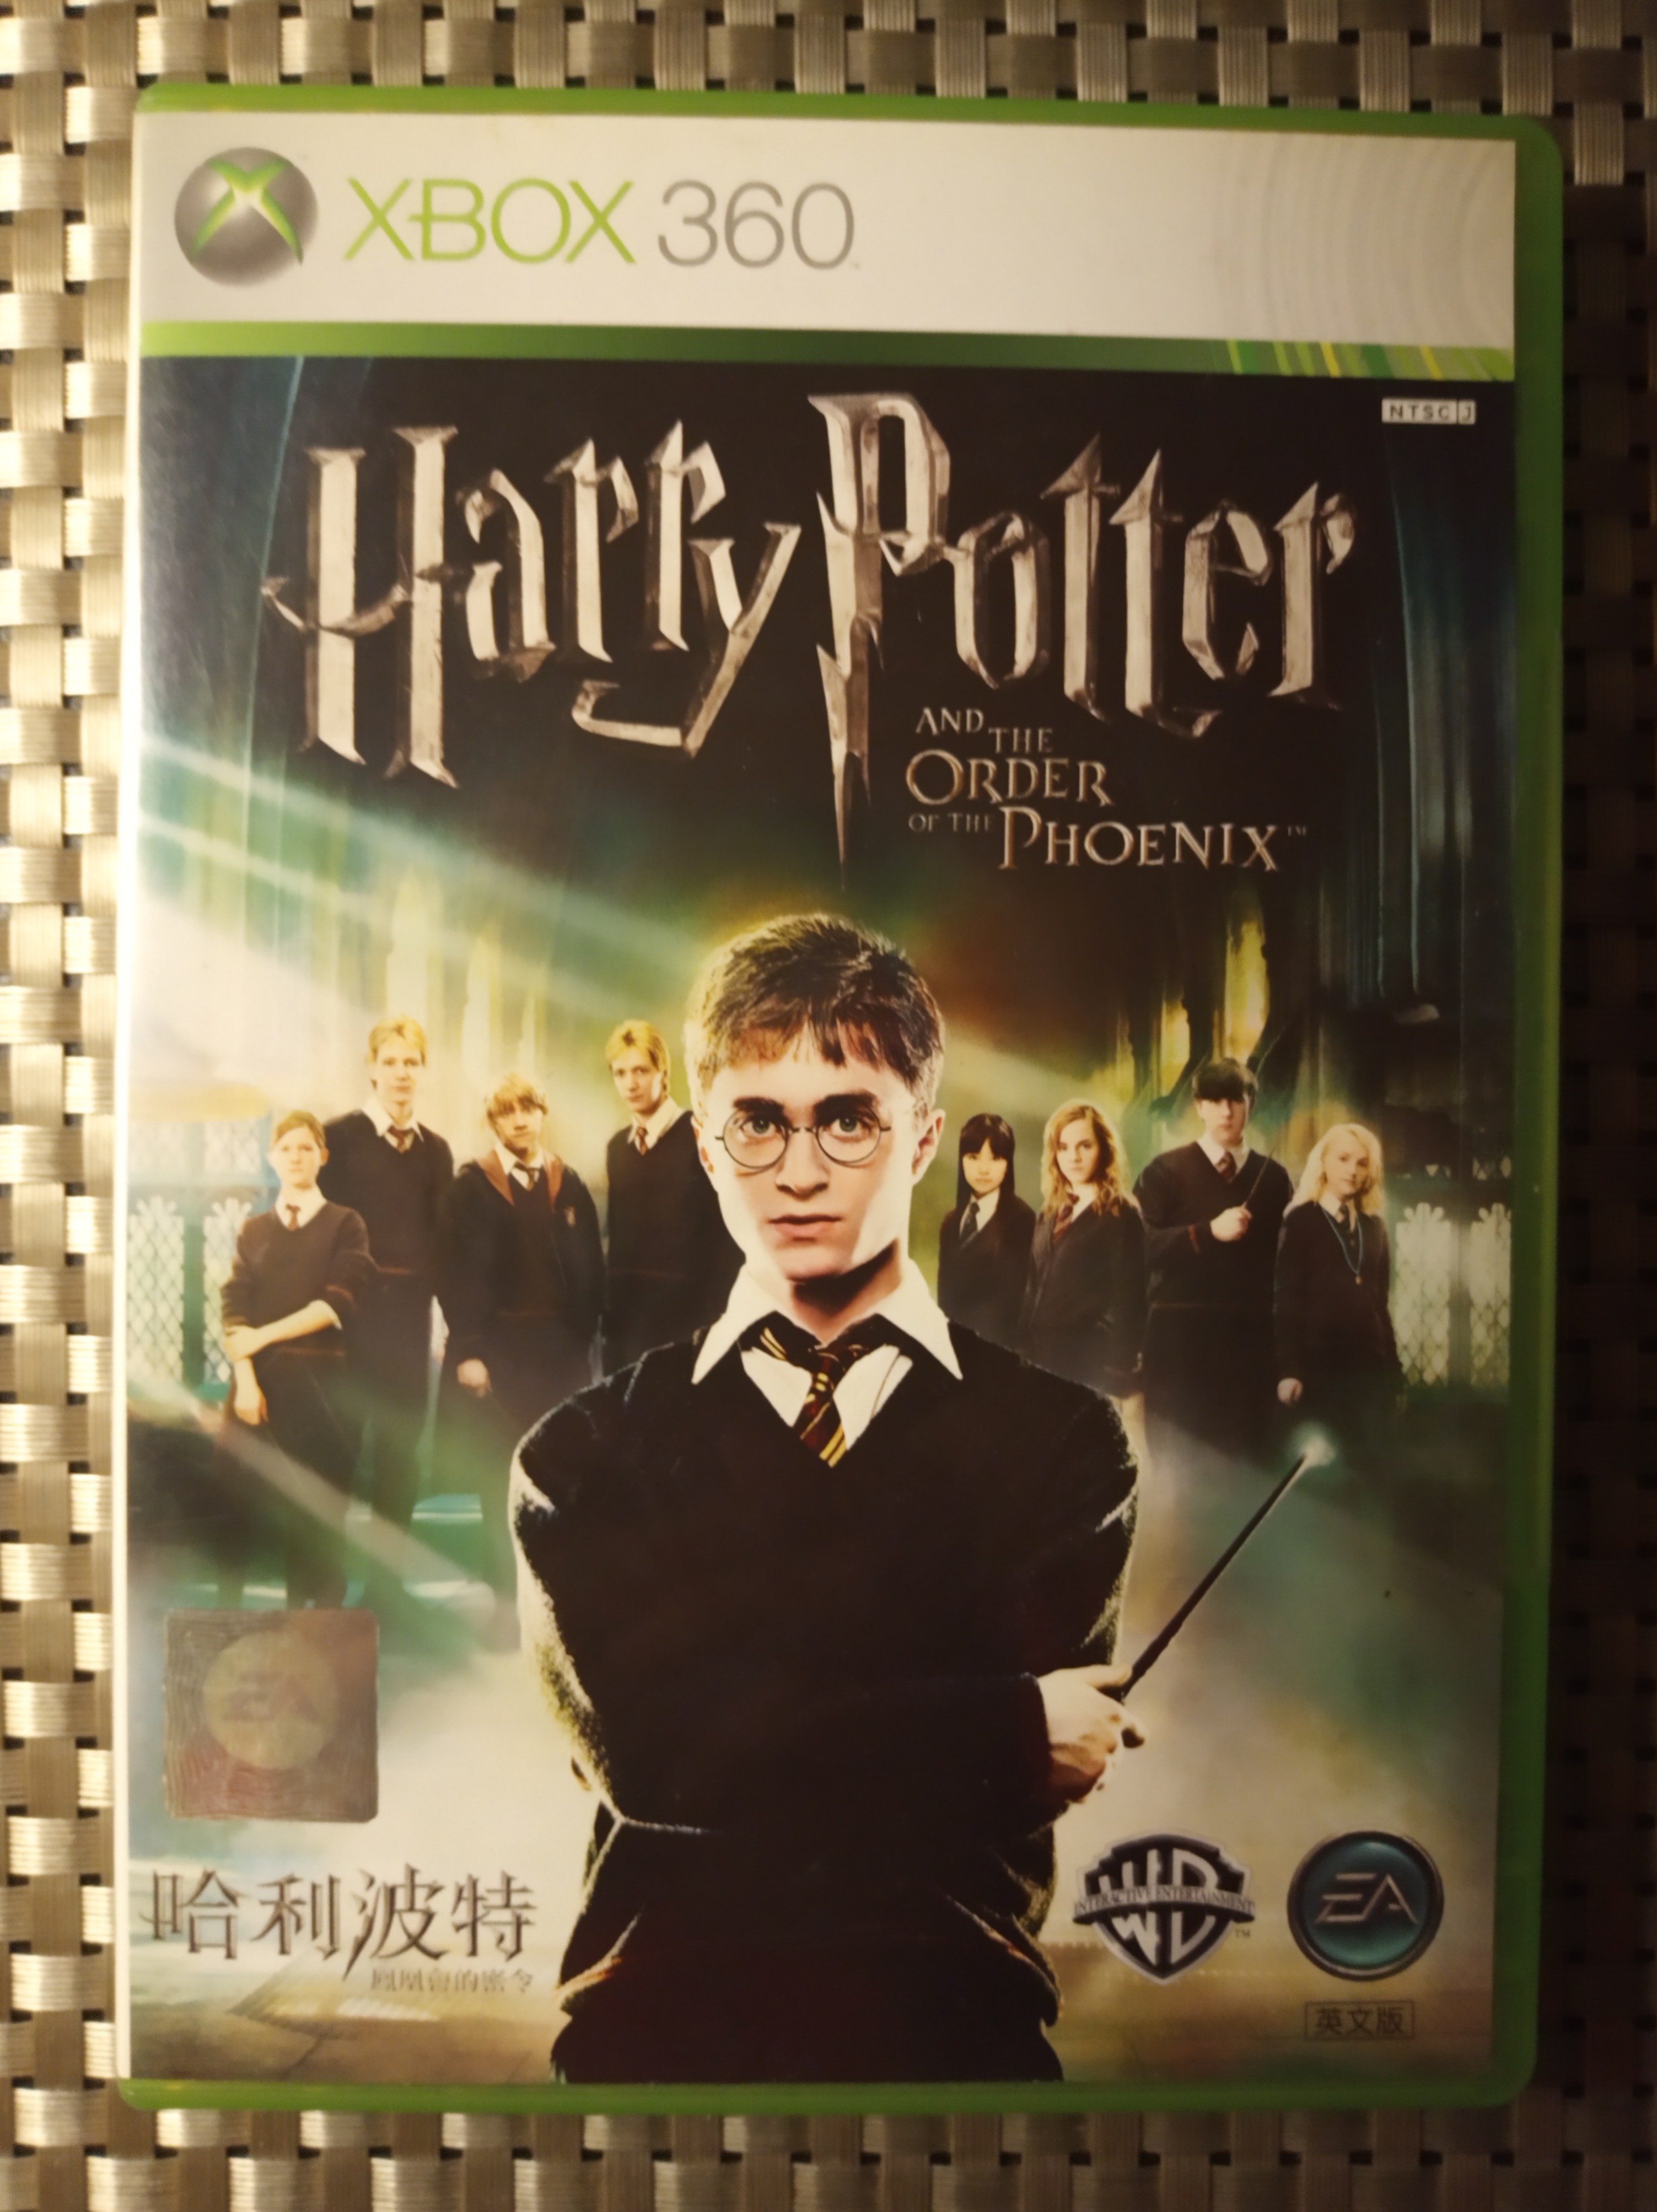 harry potter xbox 360 games